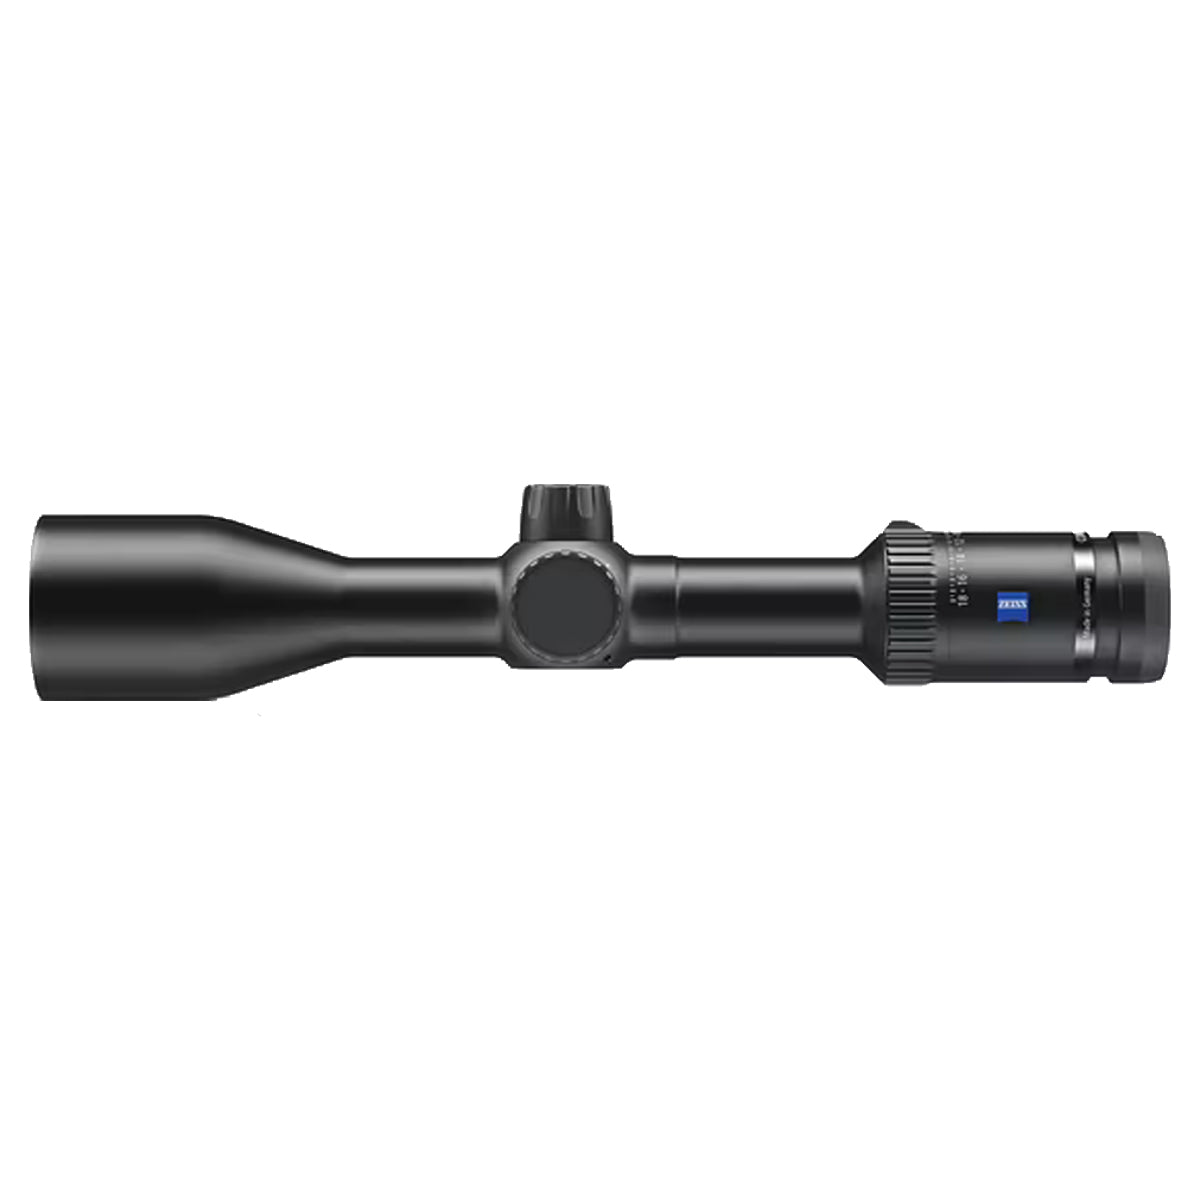 Zeiss Conquest V6 3-18x50 w/ZMOA-2 #94 Reticle Riflescope in  by GOHUNT | Zeiss - GOHUNT Shop